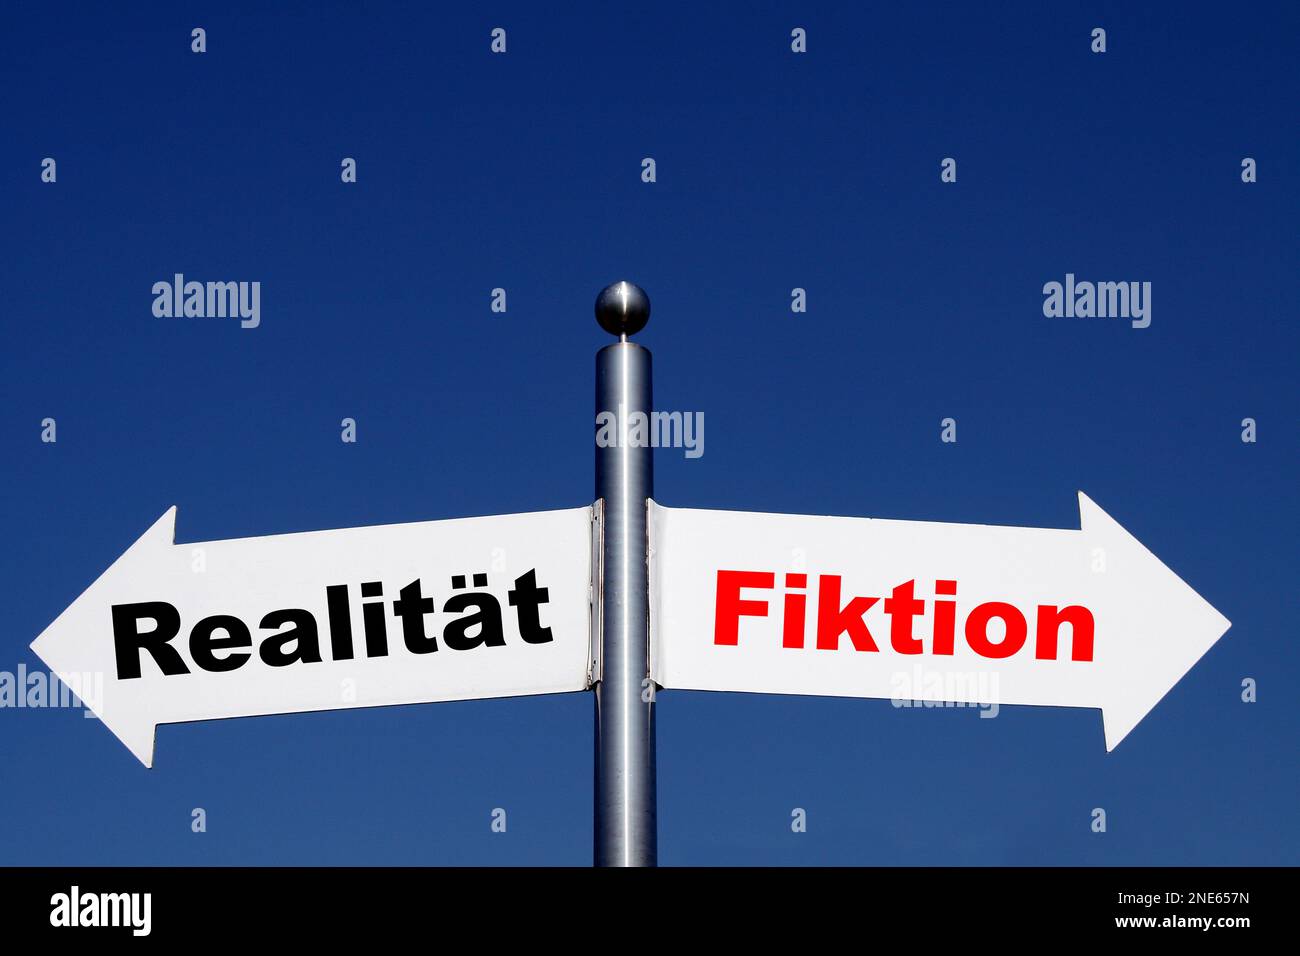 signposts pointing in different directions, options reality - fiction Stock Photo